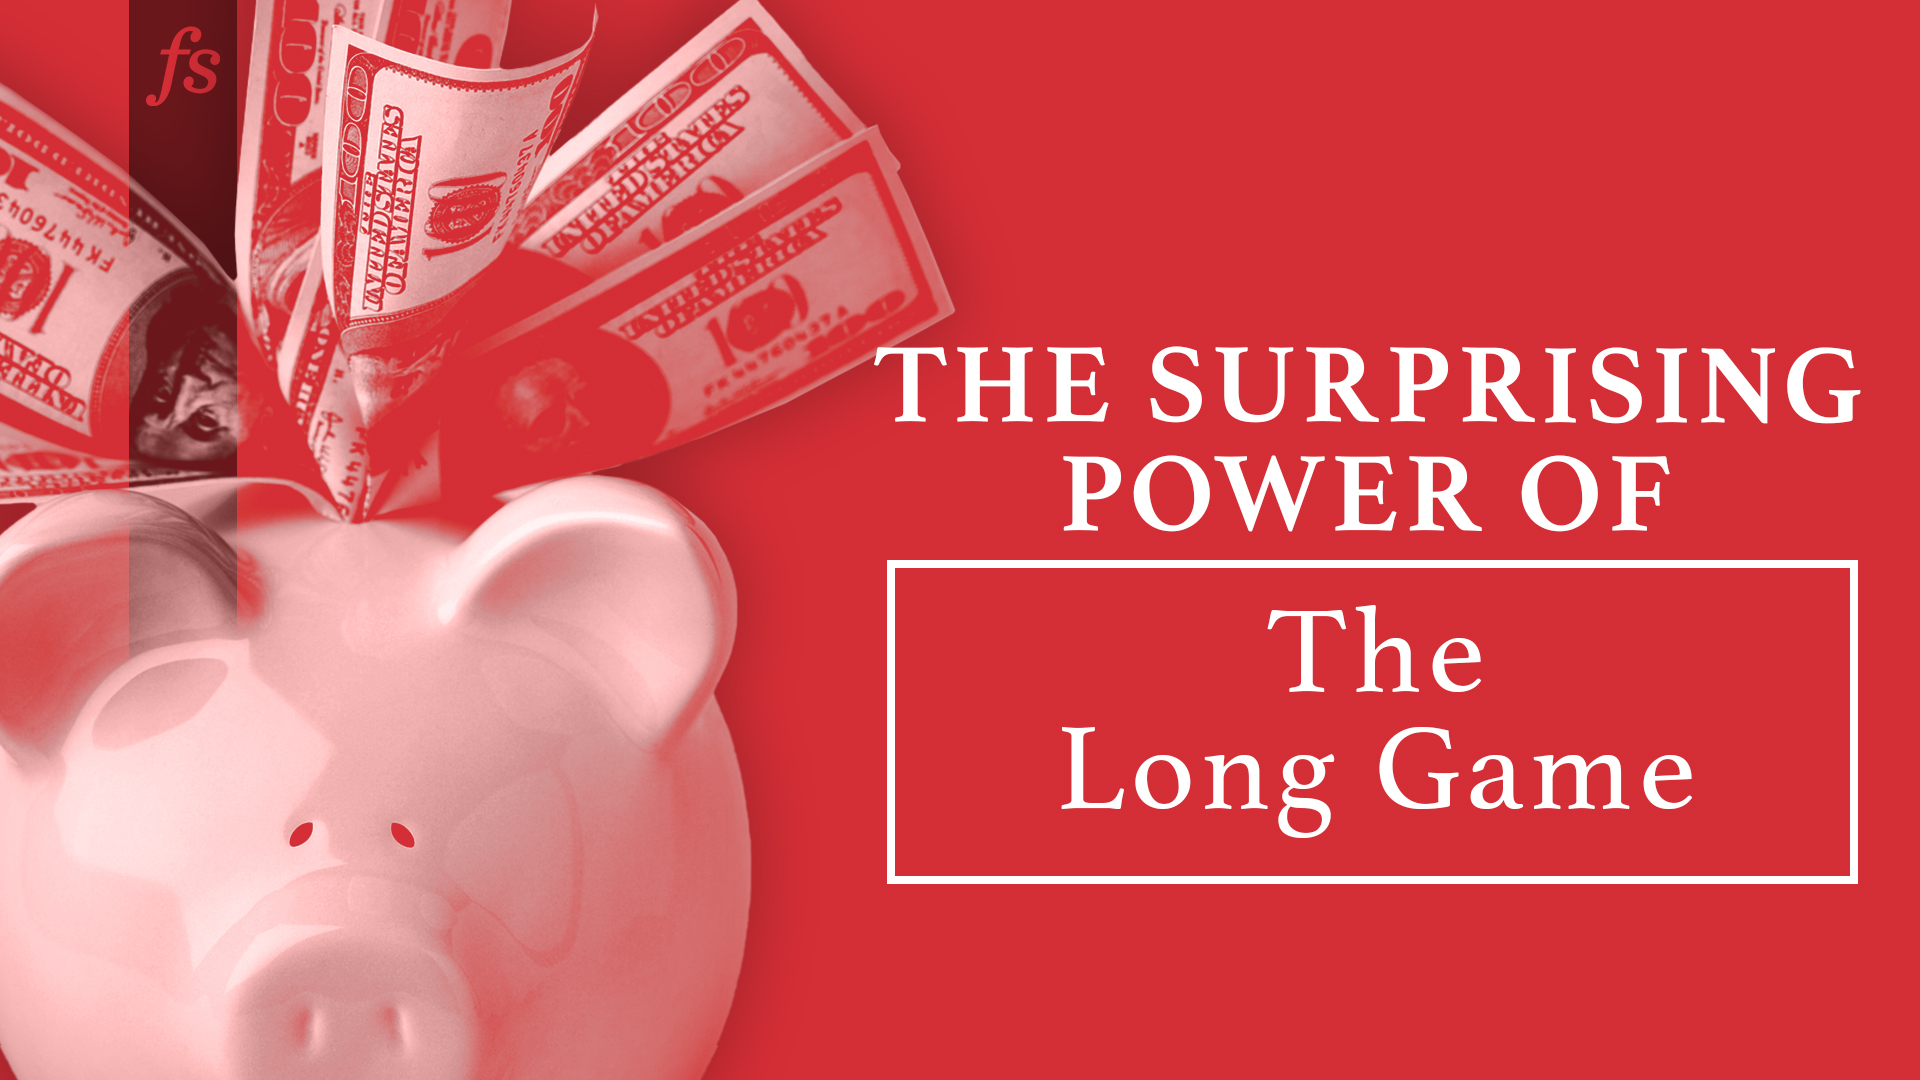 The Surprising Power of The Long Game